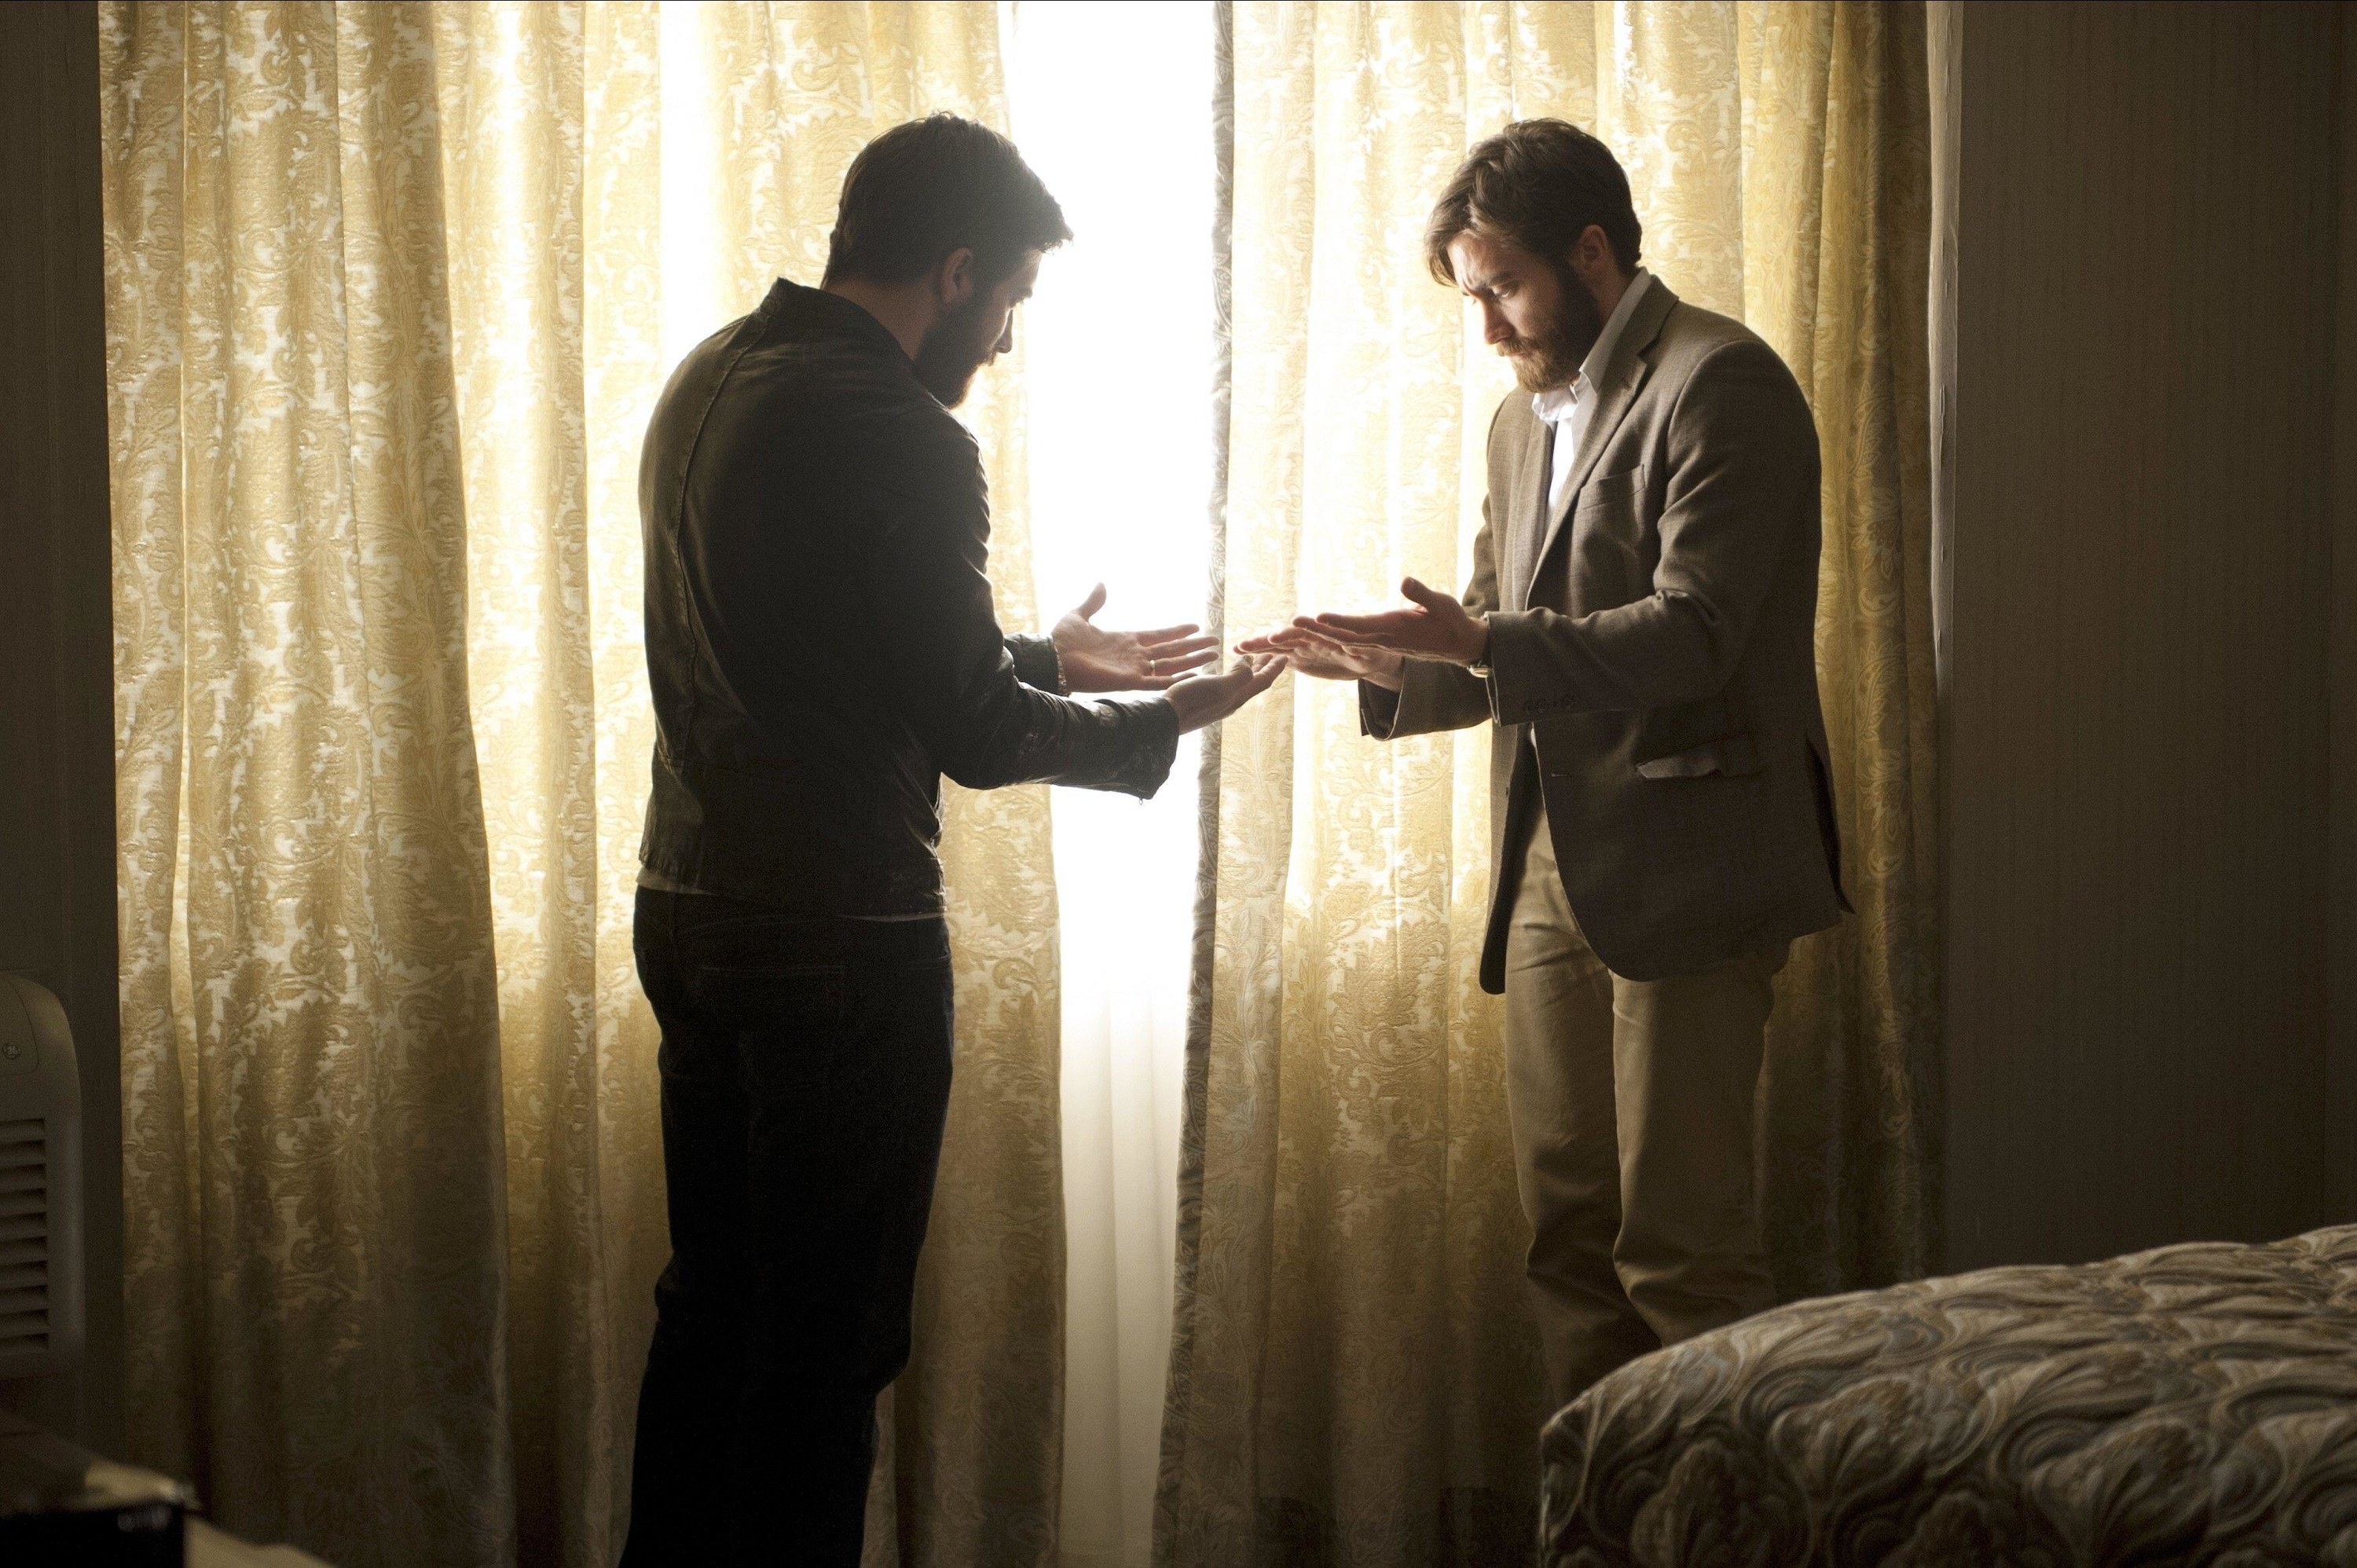 Two Jake Gyllenhaals stand in a dimly lit hotel room